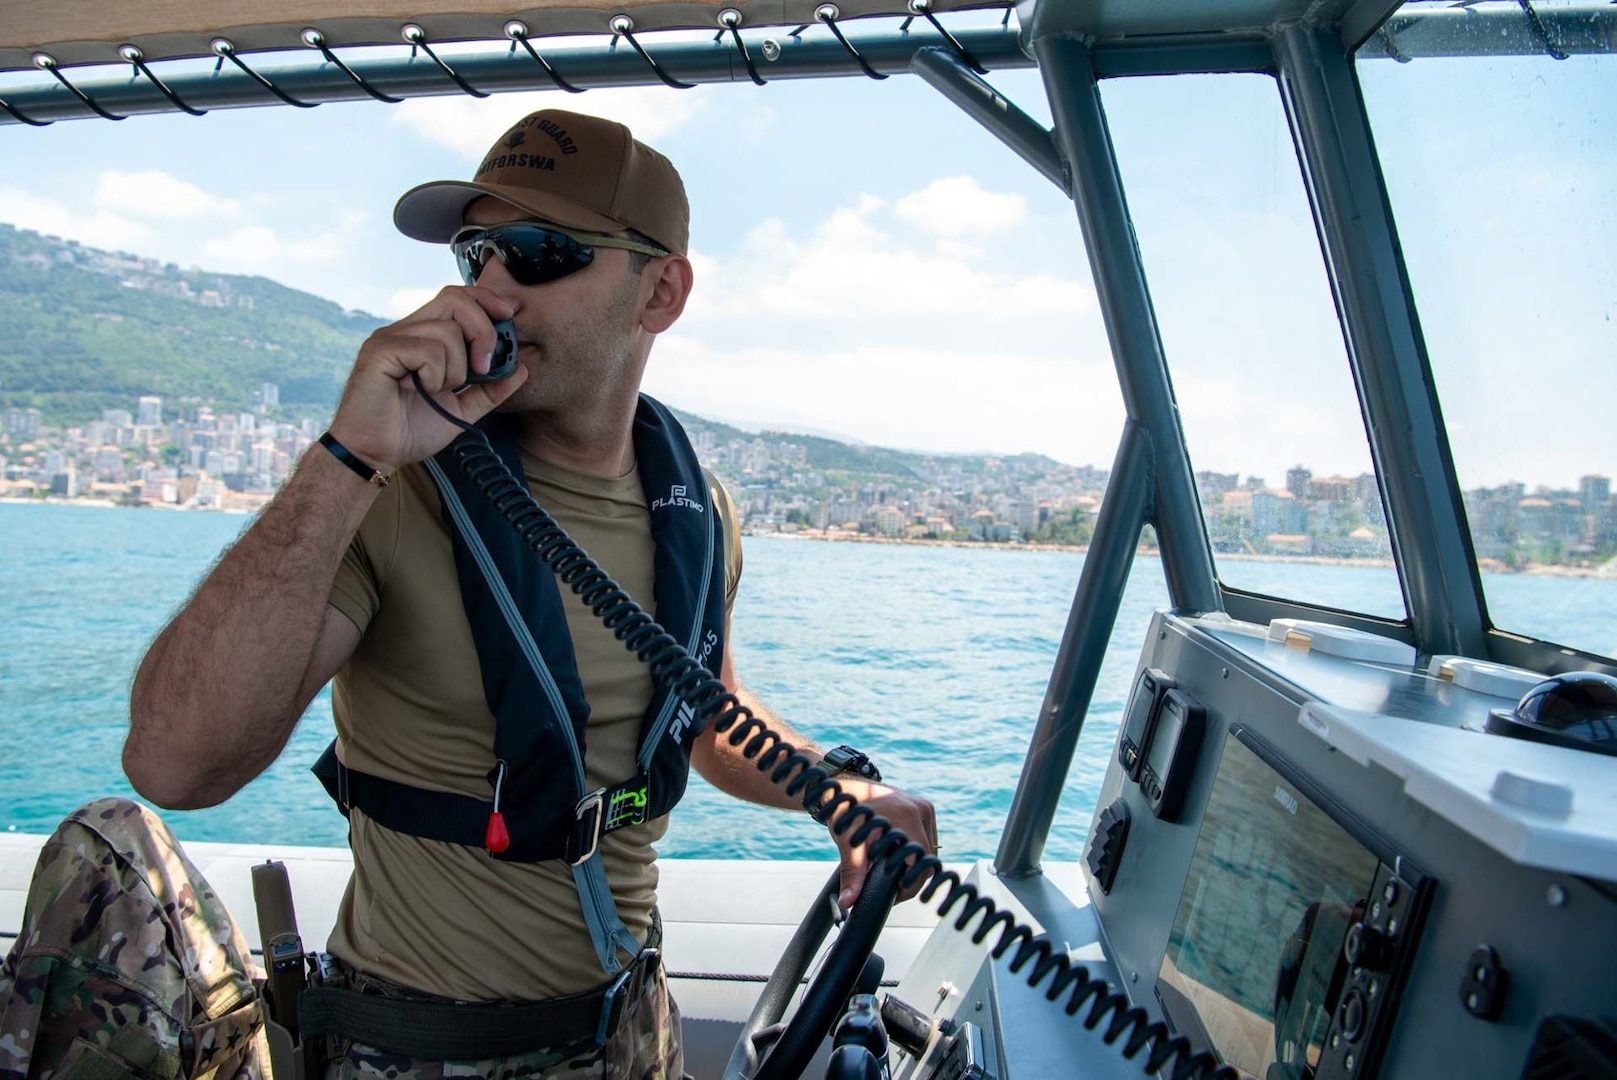 210518-N-KC128-0192 BERUIT (May 18, 2021) – A member of the Lebanese Armed Forces operates a rigid-hull inflatable boat in the Mediterranean Sea during small boat operations as part of exercise Resolute Union 21 at Jounieh Naval Base, Lebanon, May 18. Resolute Union 21 is an annual, bilateral explosive ordnance disposal and maritime security exercise between U.S. 5th Fleet and Lebanese Armed Forces to enhance mutual capabilities and interoperability. (U.S. Navy photo by Mass Communication Specialist 1st Class Daniel Hinton)